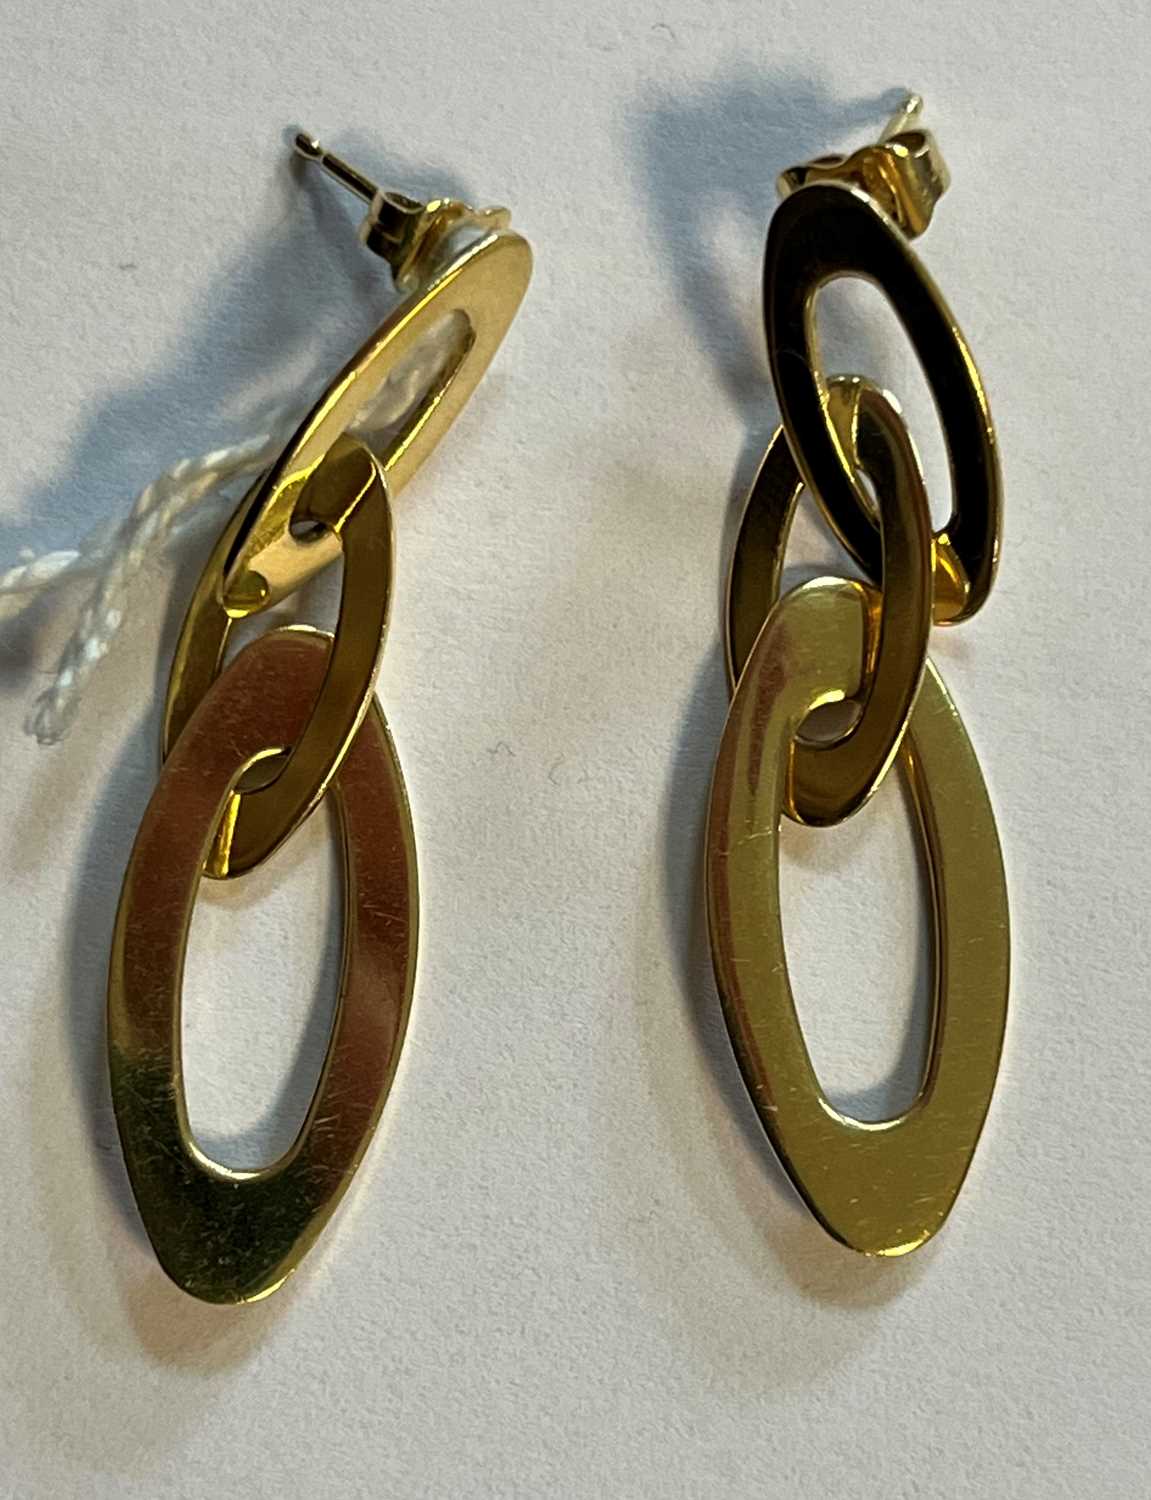 A pair of 18ct gold 'Chic & Shine' drop earrings, by Roberto Coin, - Image 4 of 5